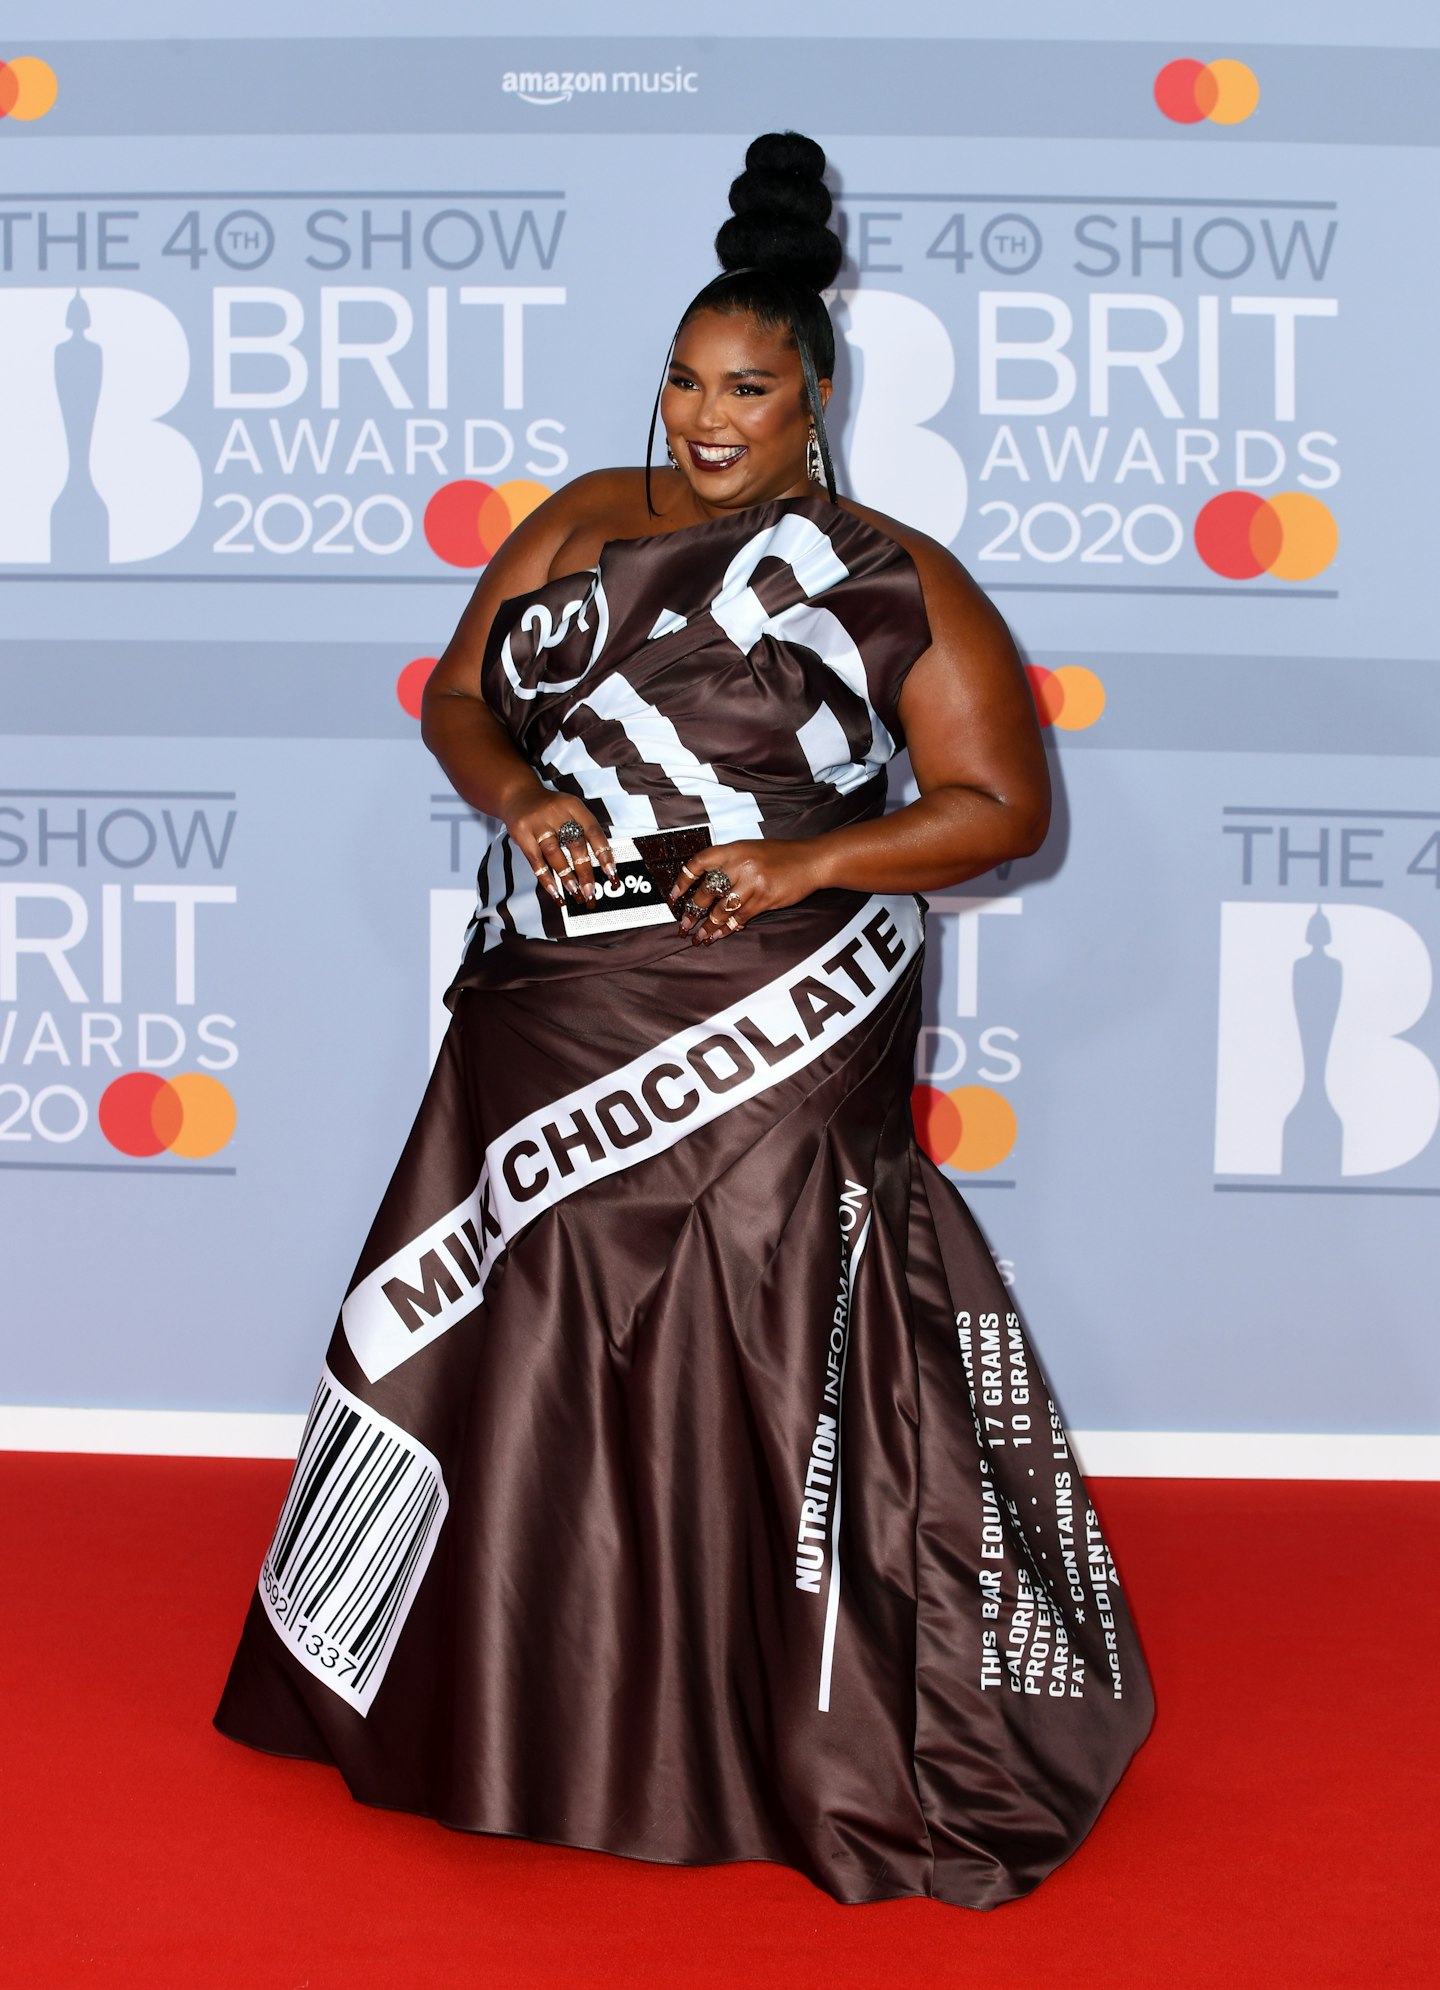 Lizzo in a Moschino gown designed to resemble a Hershey's chocolate bar wrapper